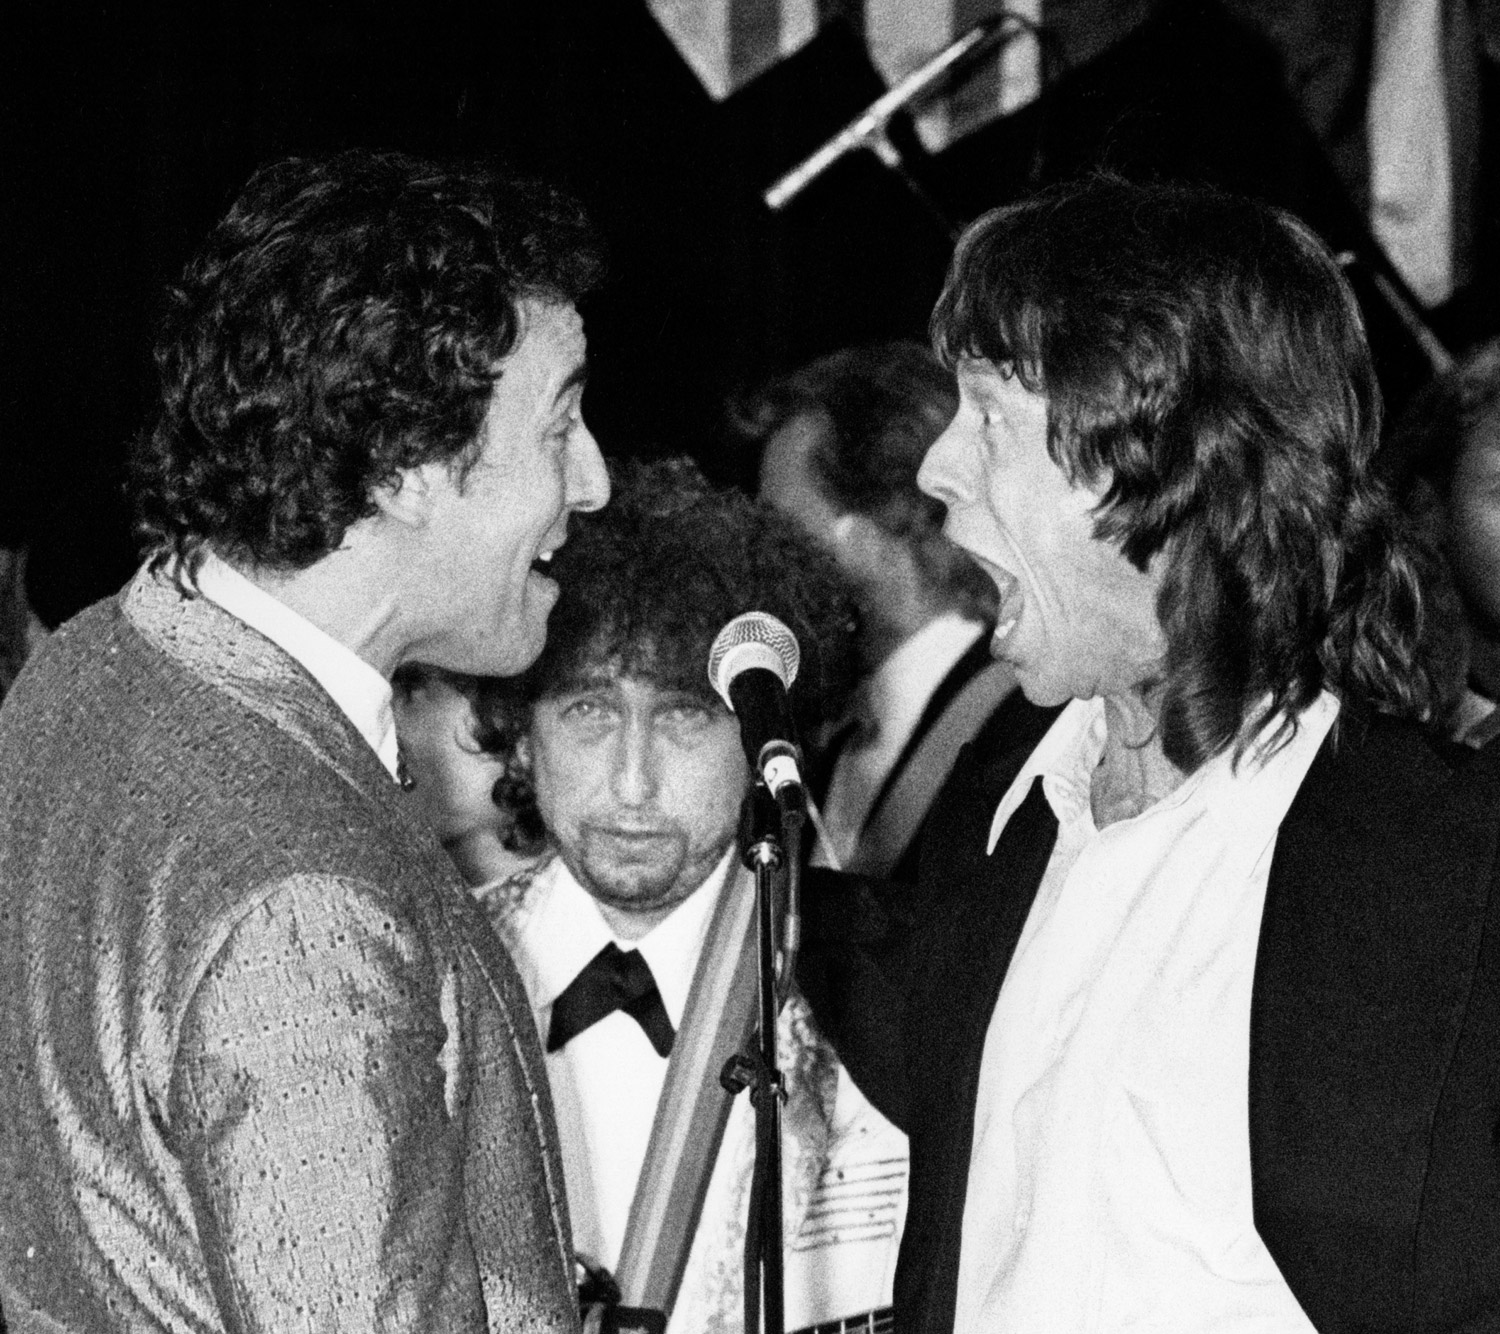 Bruce Springsteen, Bob, Dylan, and Mick Jagger (left to right) perform during the 3rd Annual Rock and Roll Hall of Fame Induction Ceremony. Jan. 20, 1988